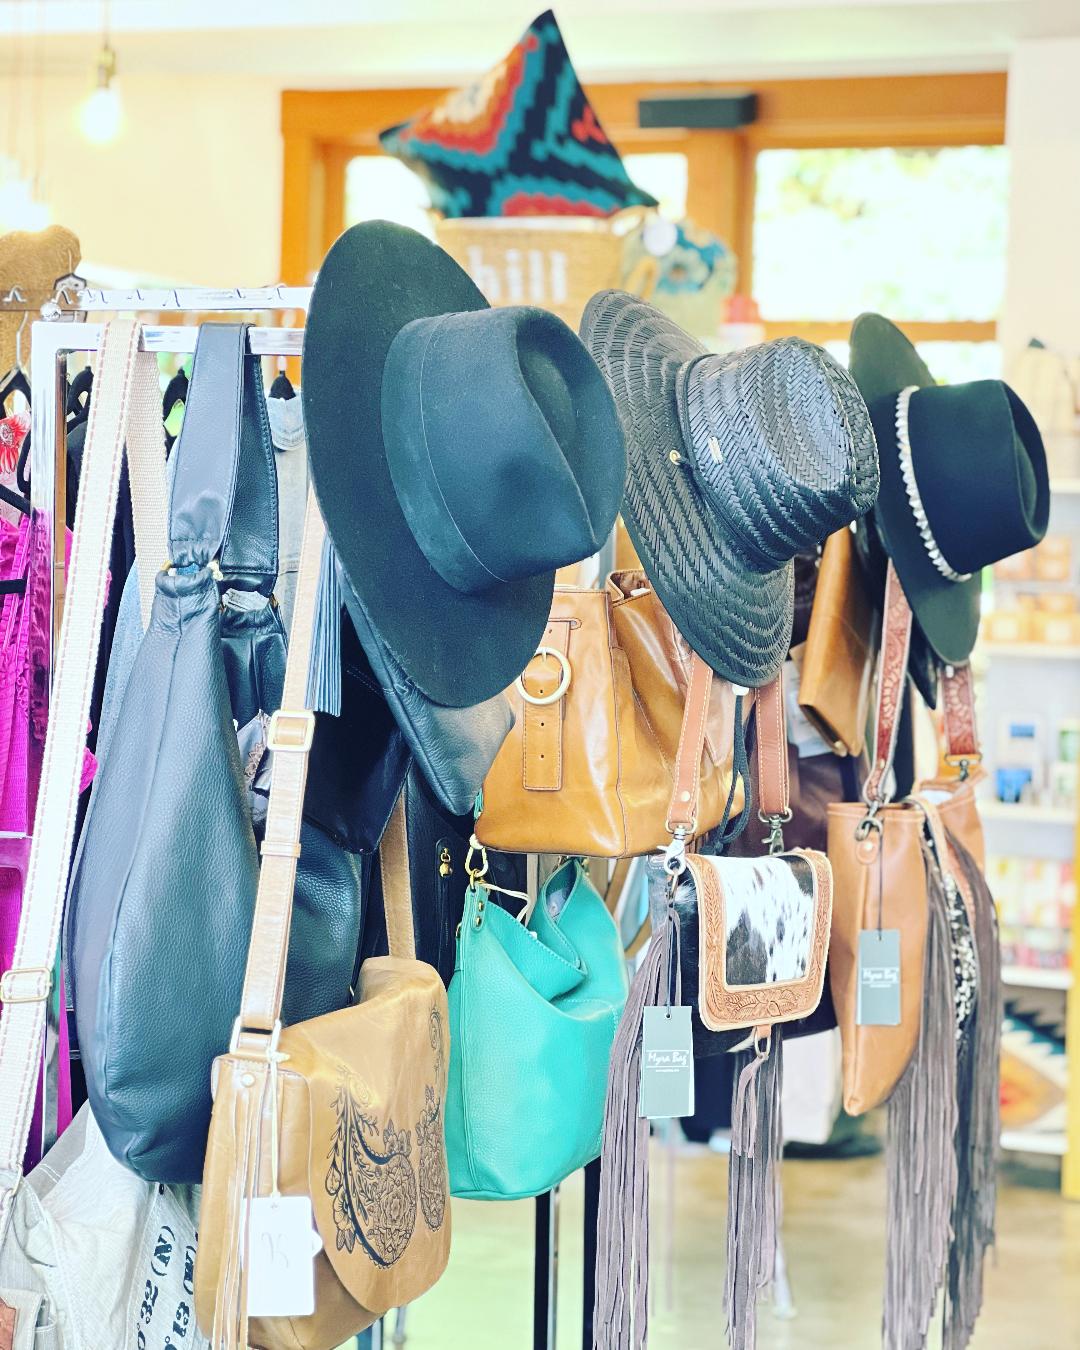 picture of hats and  handbags